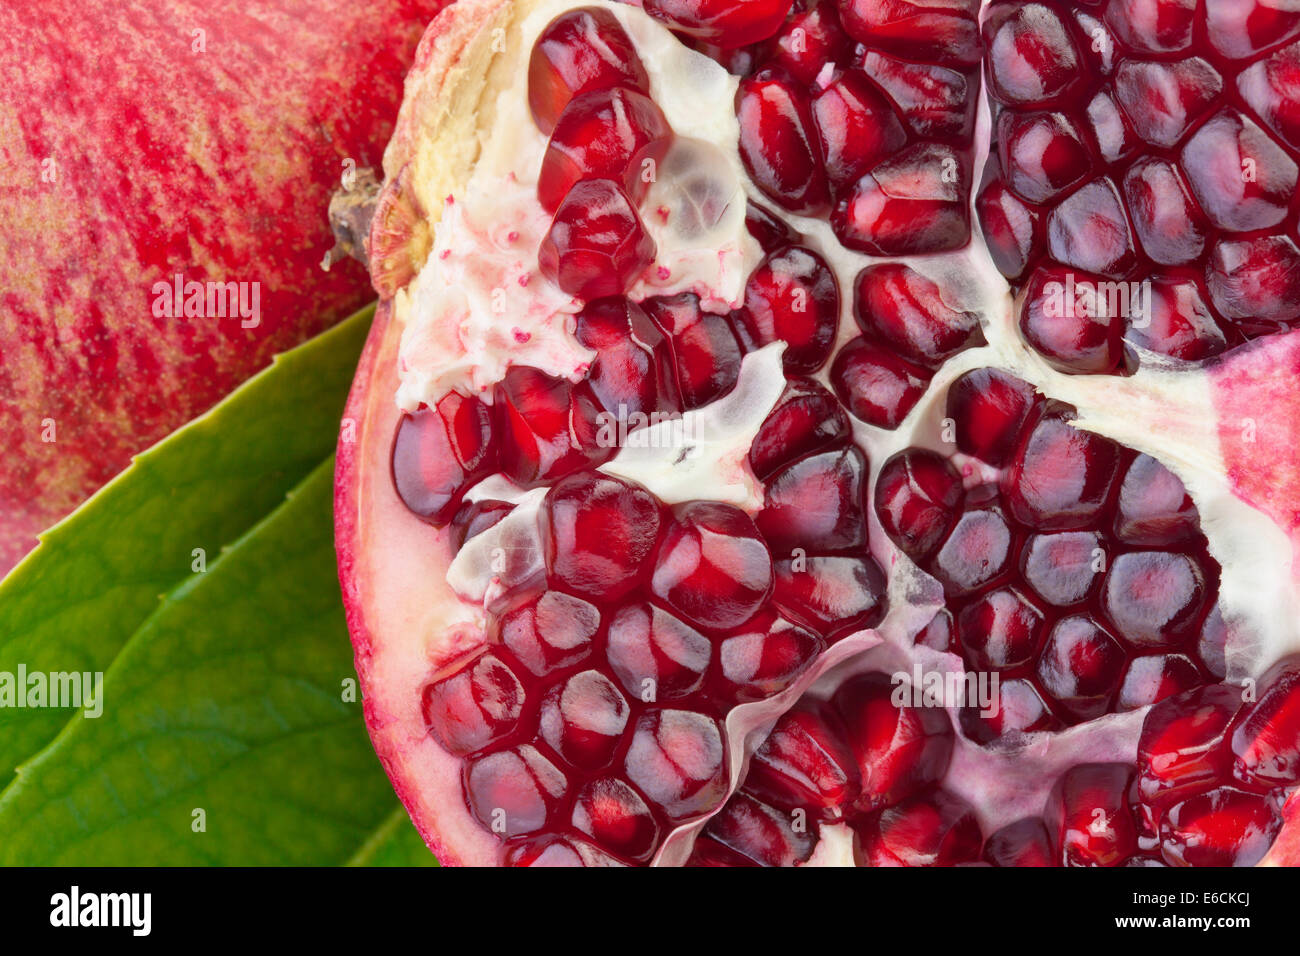 Pomegranate fruit in close up Stock Photo